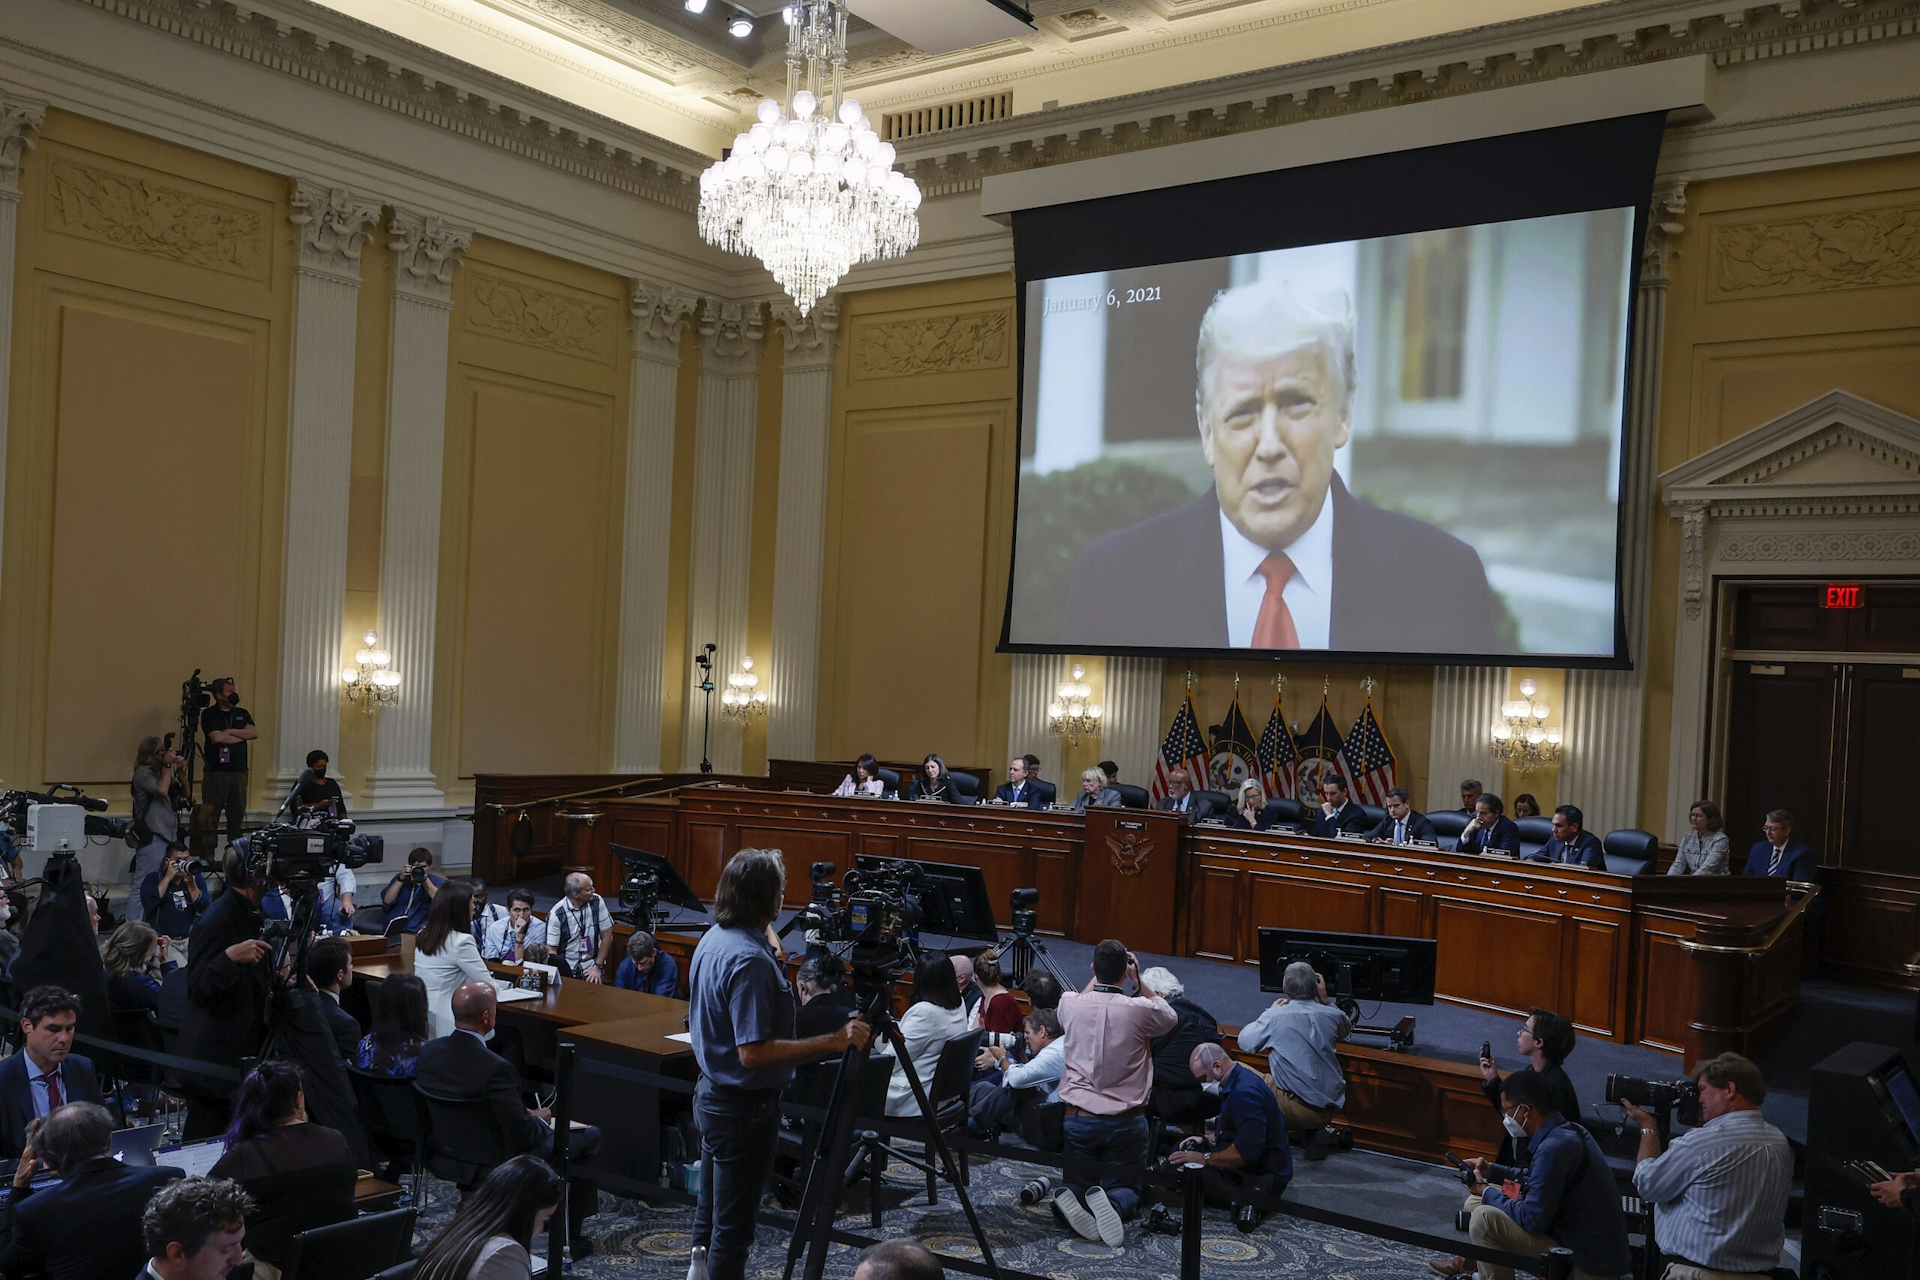 Photograph of video of former president Trump being projected during hearing by House Select Committee